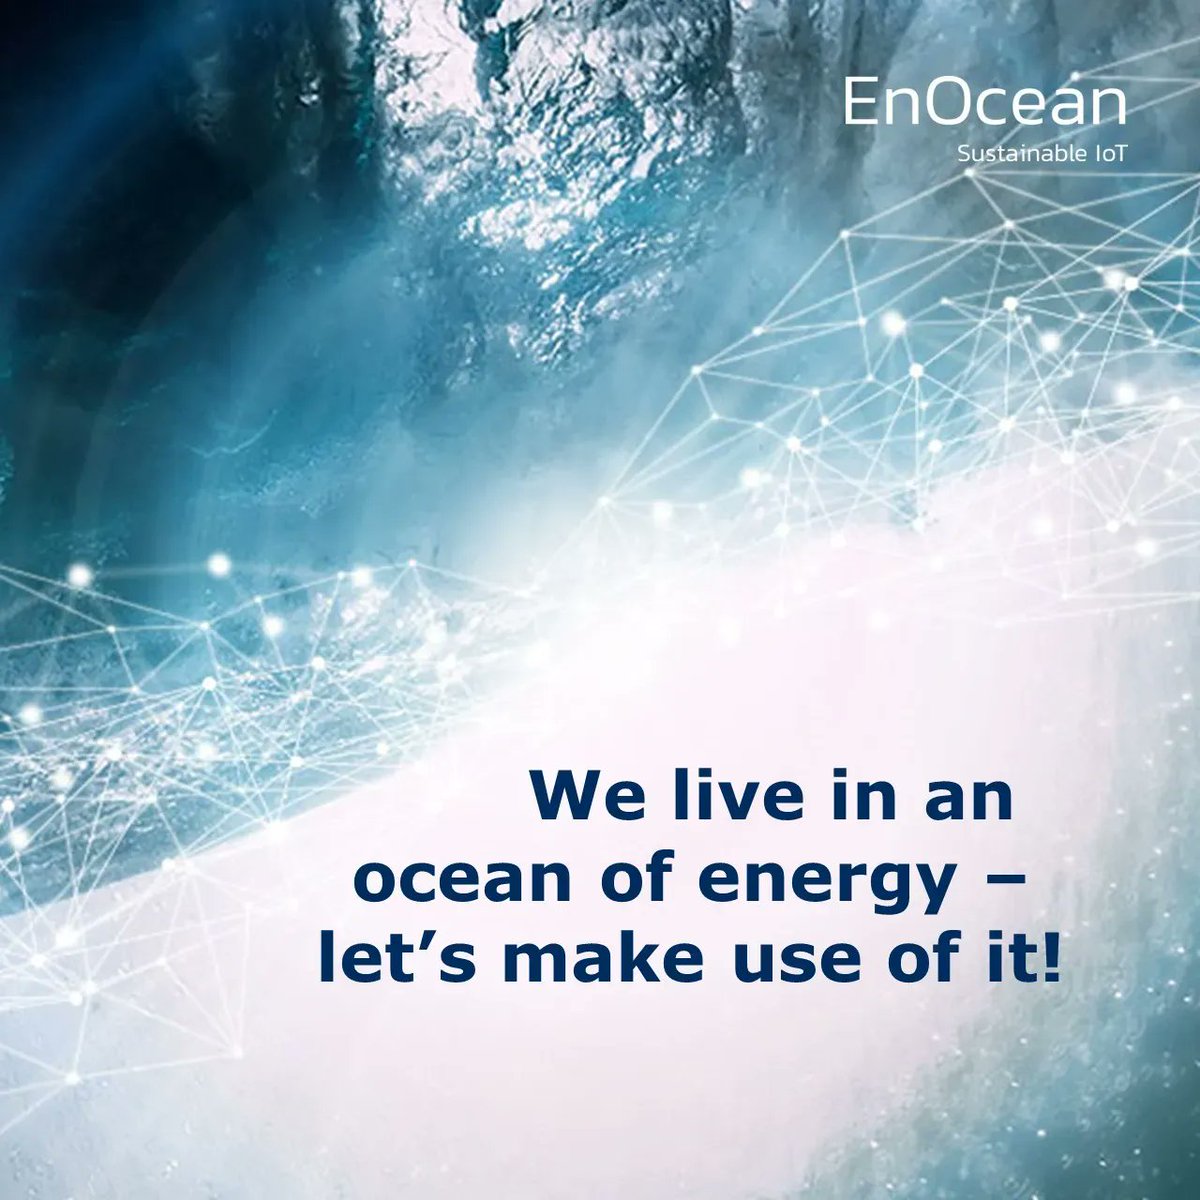 🌊 Celebrating #WorldOceanDay with #EnOcean's vision: 'We live in an ocean of energy – let's make use of it!' Our innovative #energyharvesting technology converts ambient sources to power #wireless solutions for a #sustainable future. 🌍🌿 #sustainableIoT